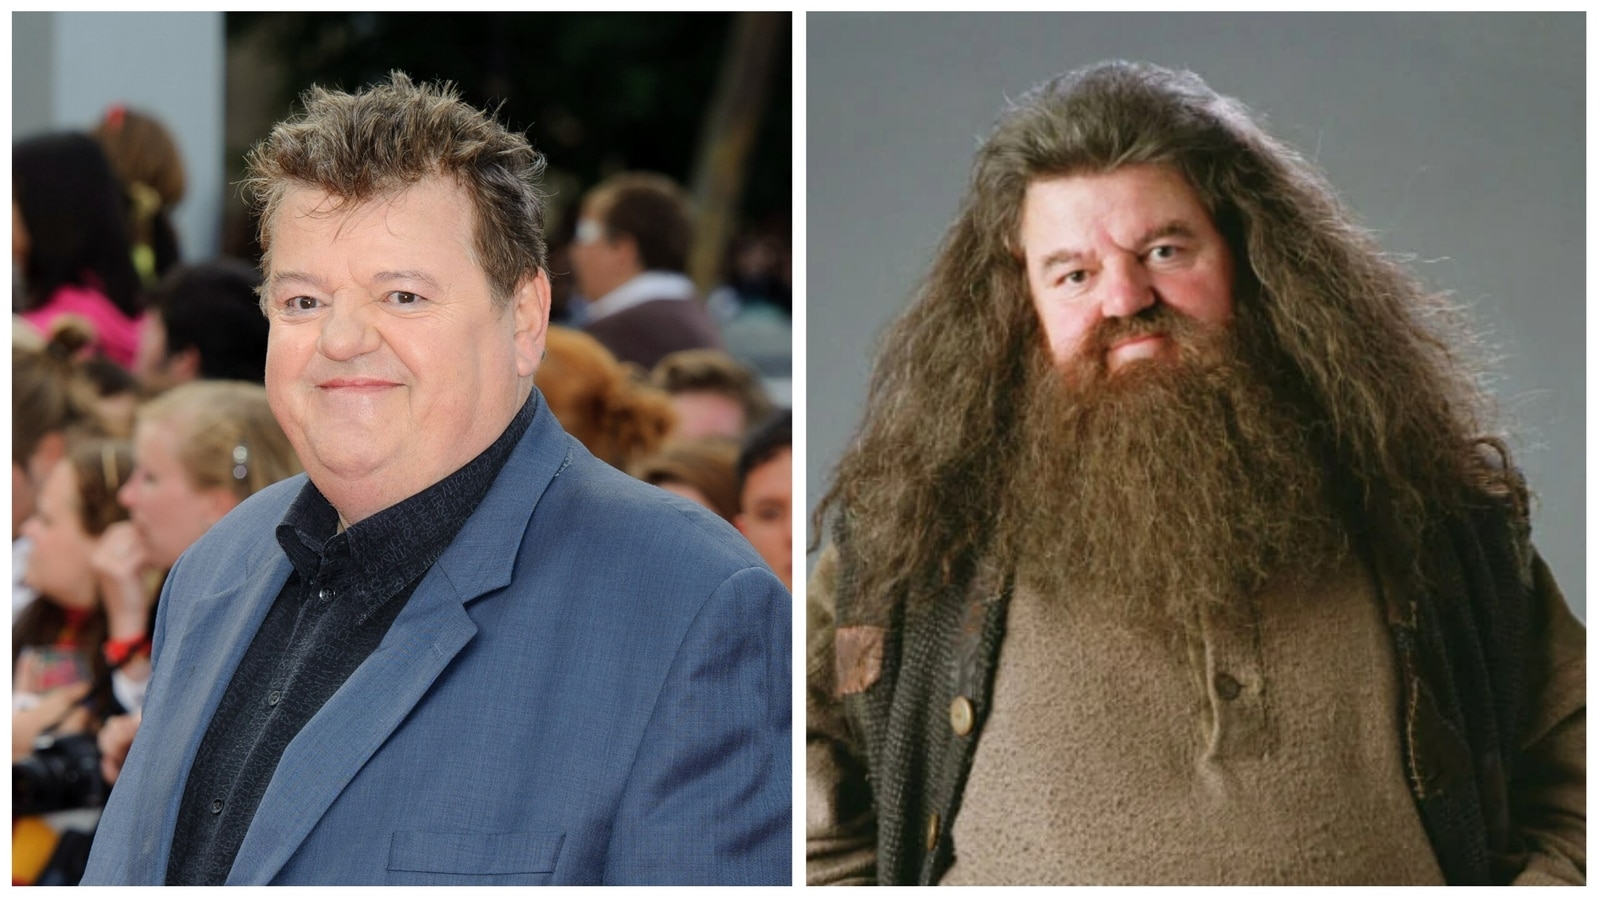 Who Played Rubeus Hagrid In The Harry Potter Franchise?